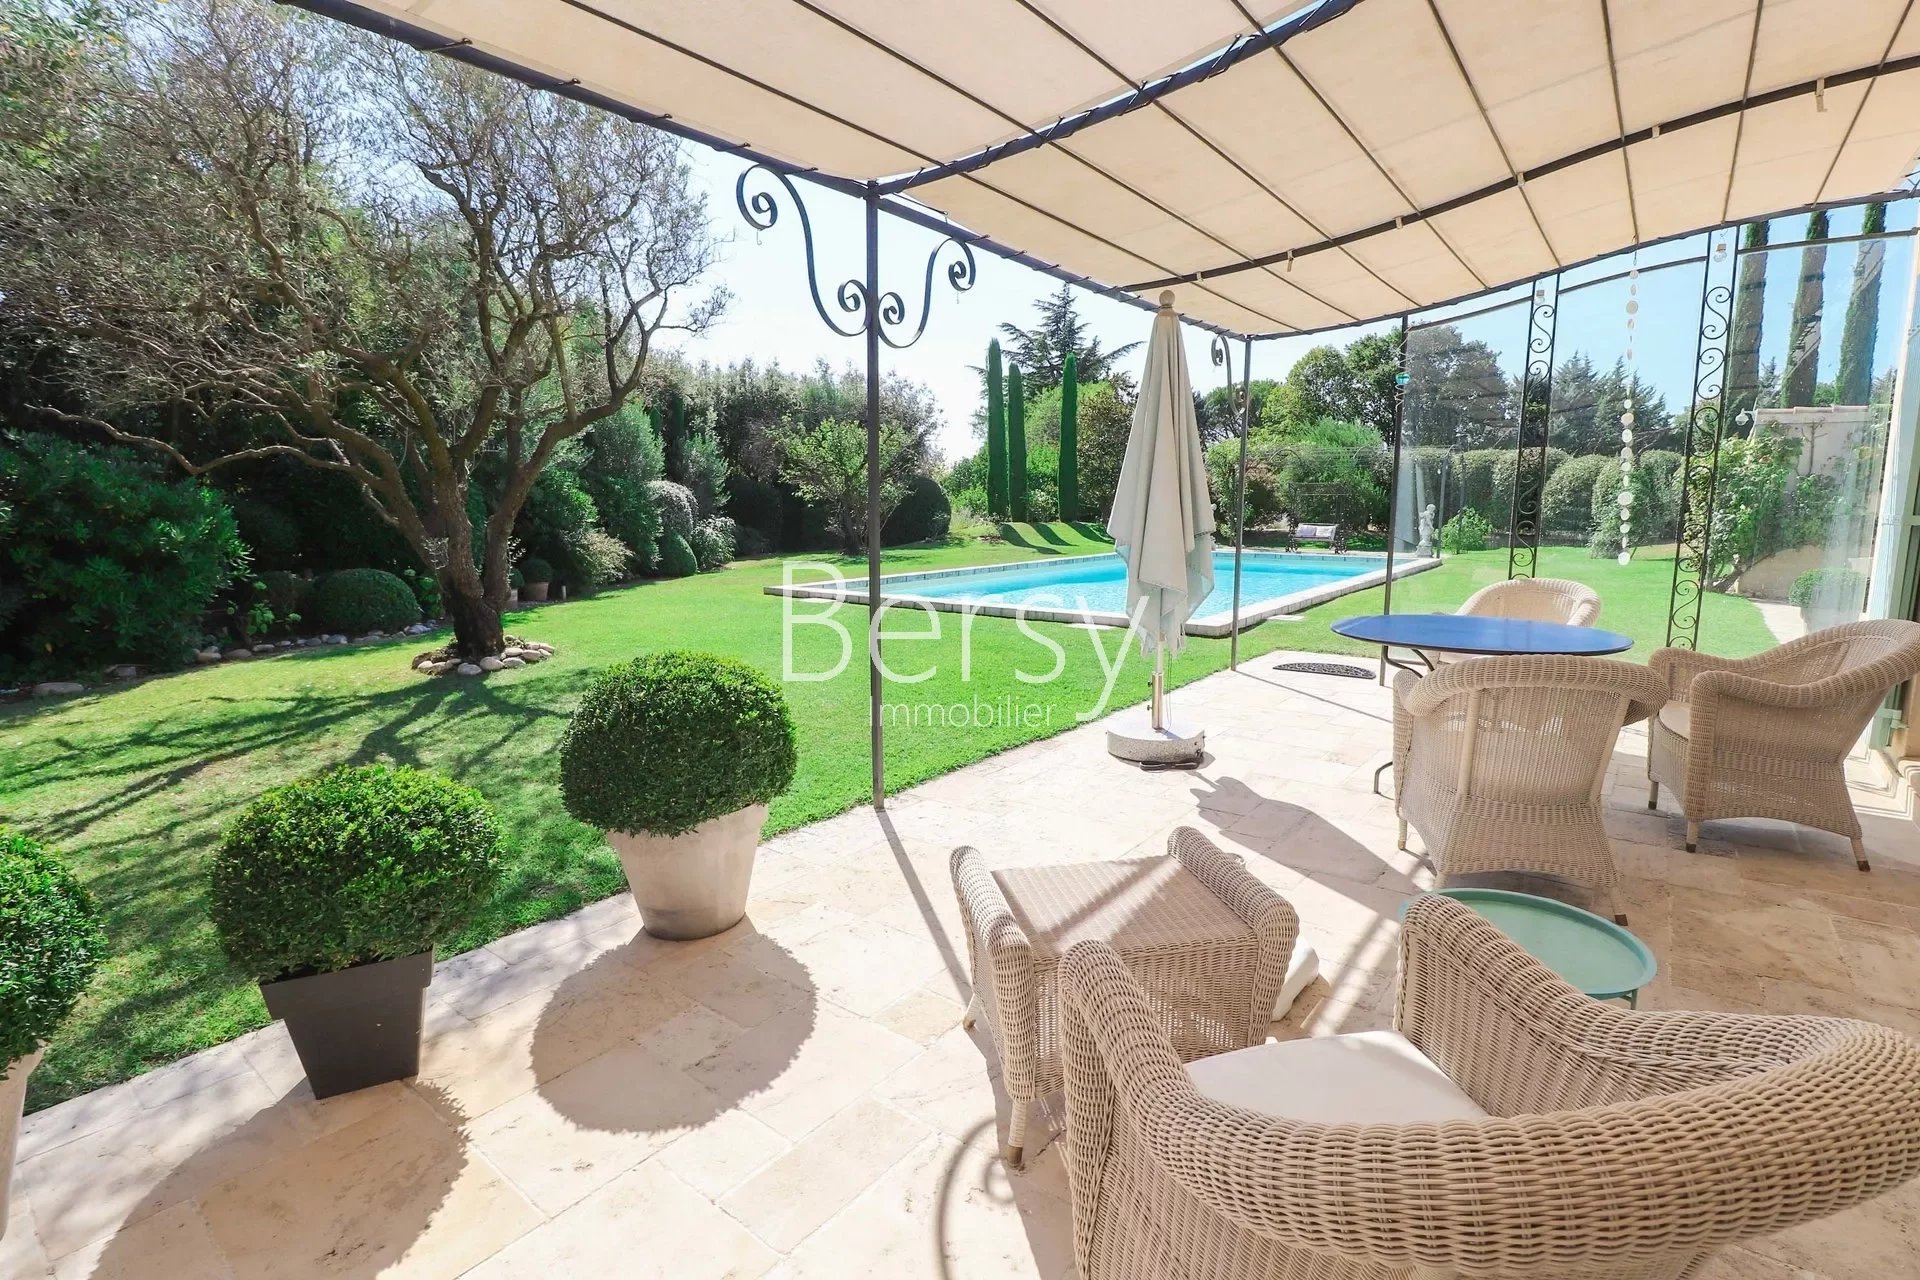 TOO LATE, IT'S SOLD! Falling for something ! Opulent single storey villa with 6x12m swimming pool and outbuildings